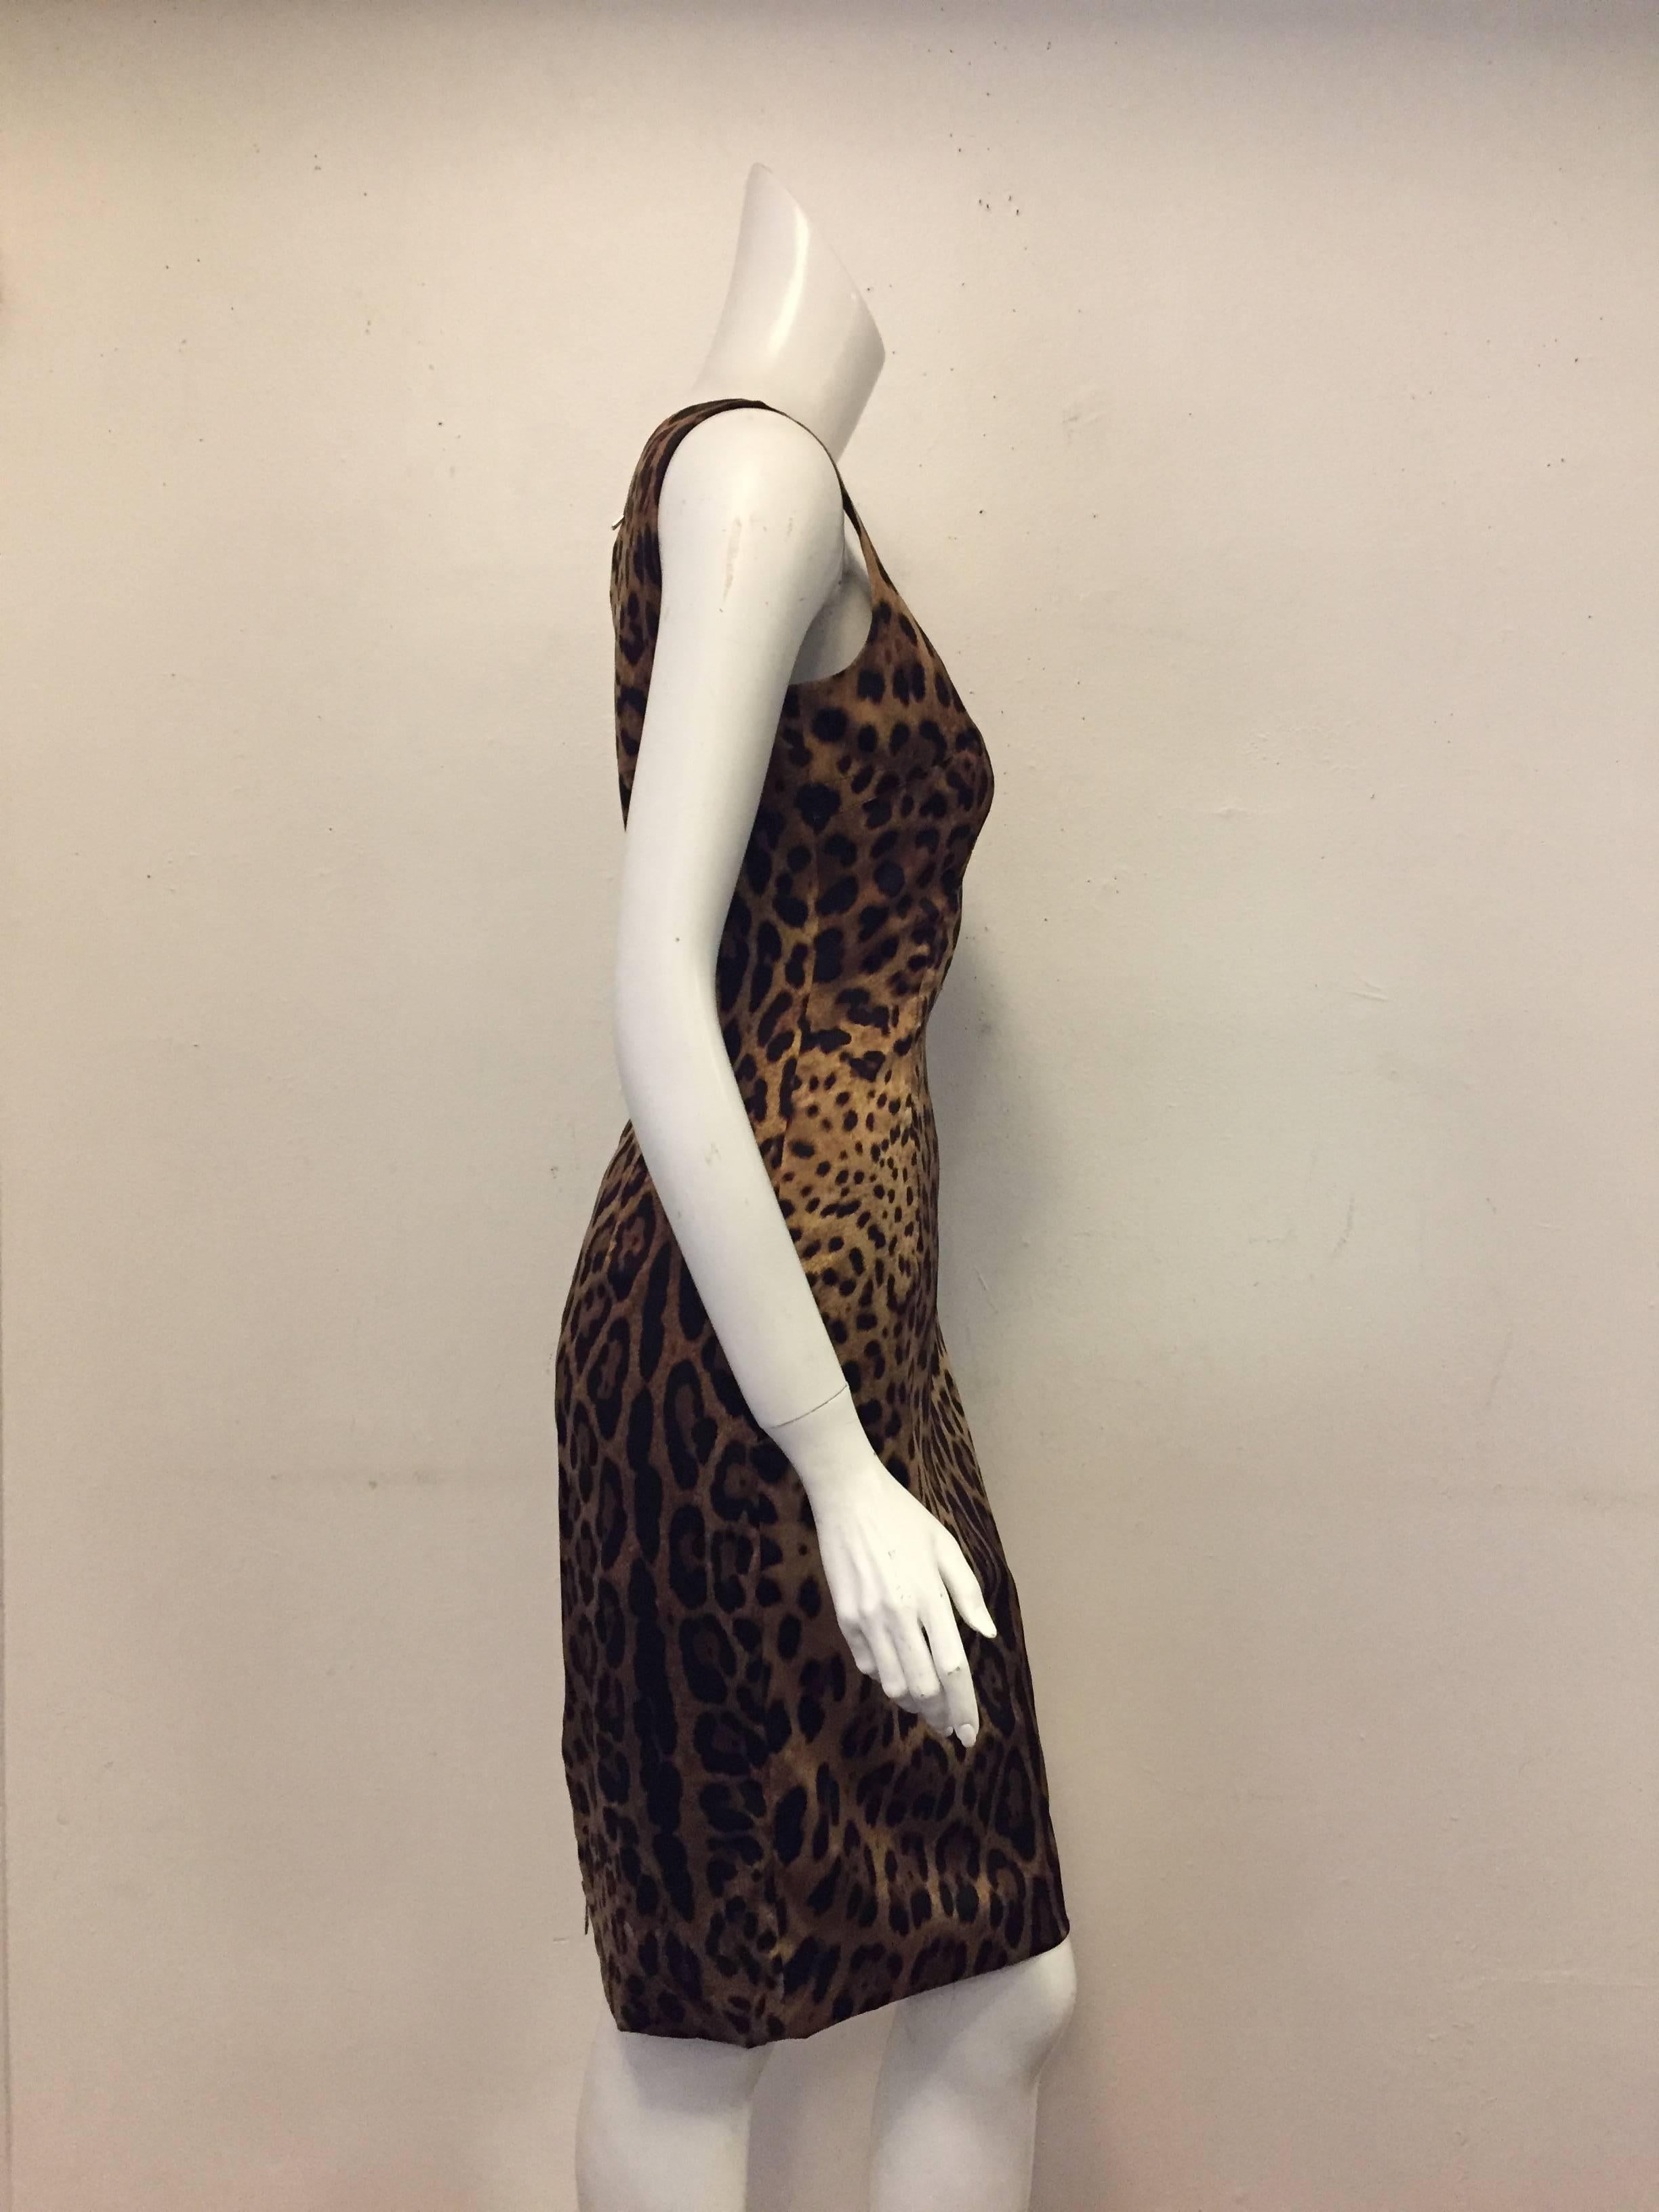 Dolce & Gabbana are known for Sicilian glamour, iconic prints and fashion for the whole family. This brown signature leopard print dress has been carefully made from a silk blend in Italy and features a round neck, a concealed rear zip fastening and